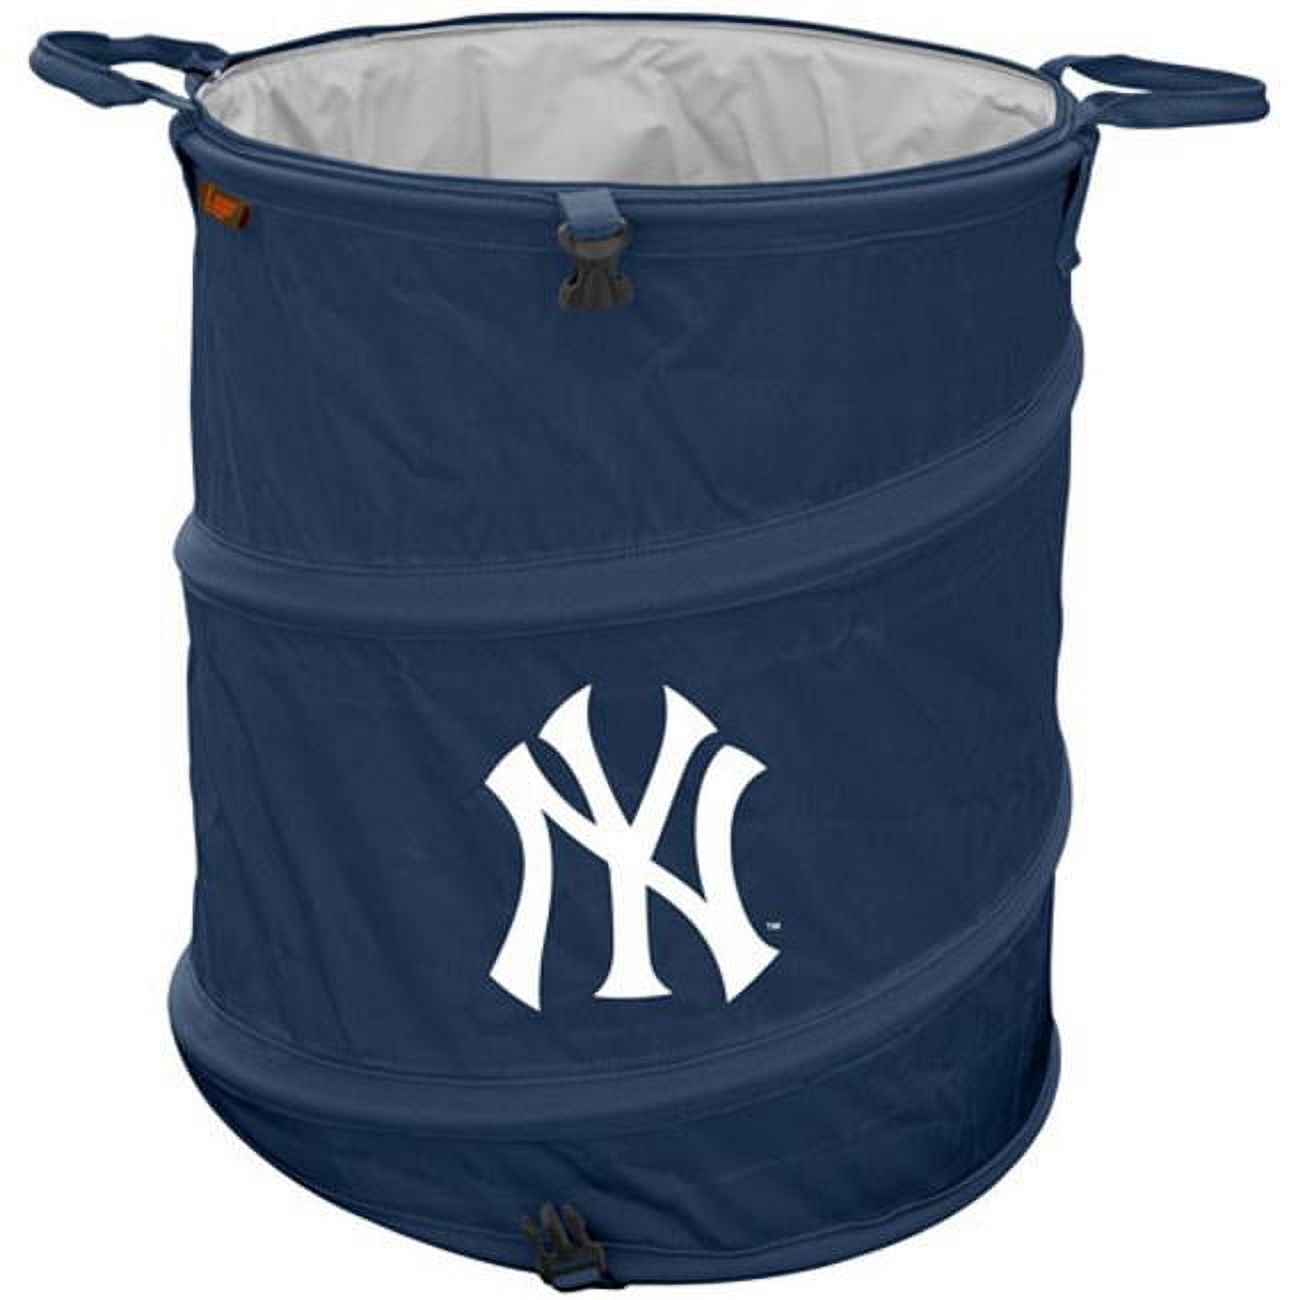 NY Yankees Collapsible 3-in-1 - image 1 of 2